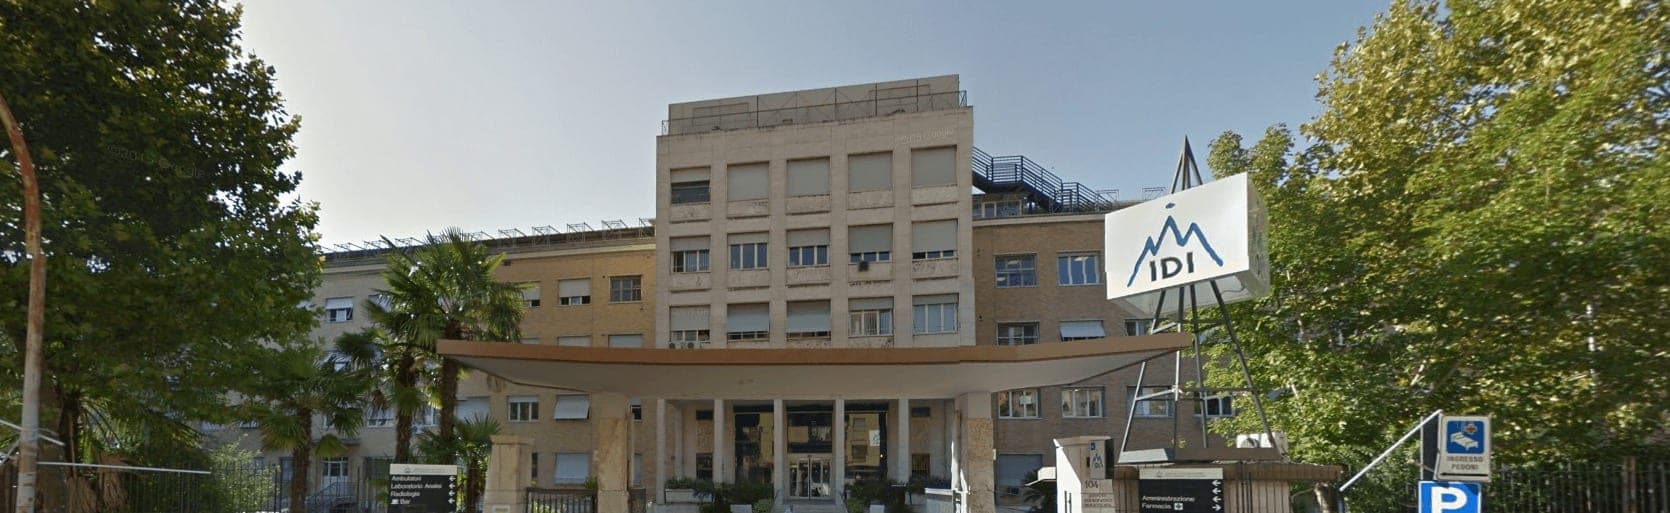 How obscure Italian hospital became the eye of a global storm